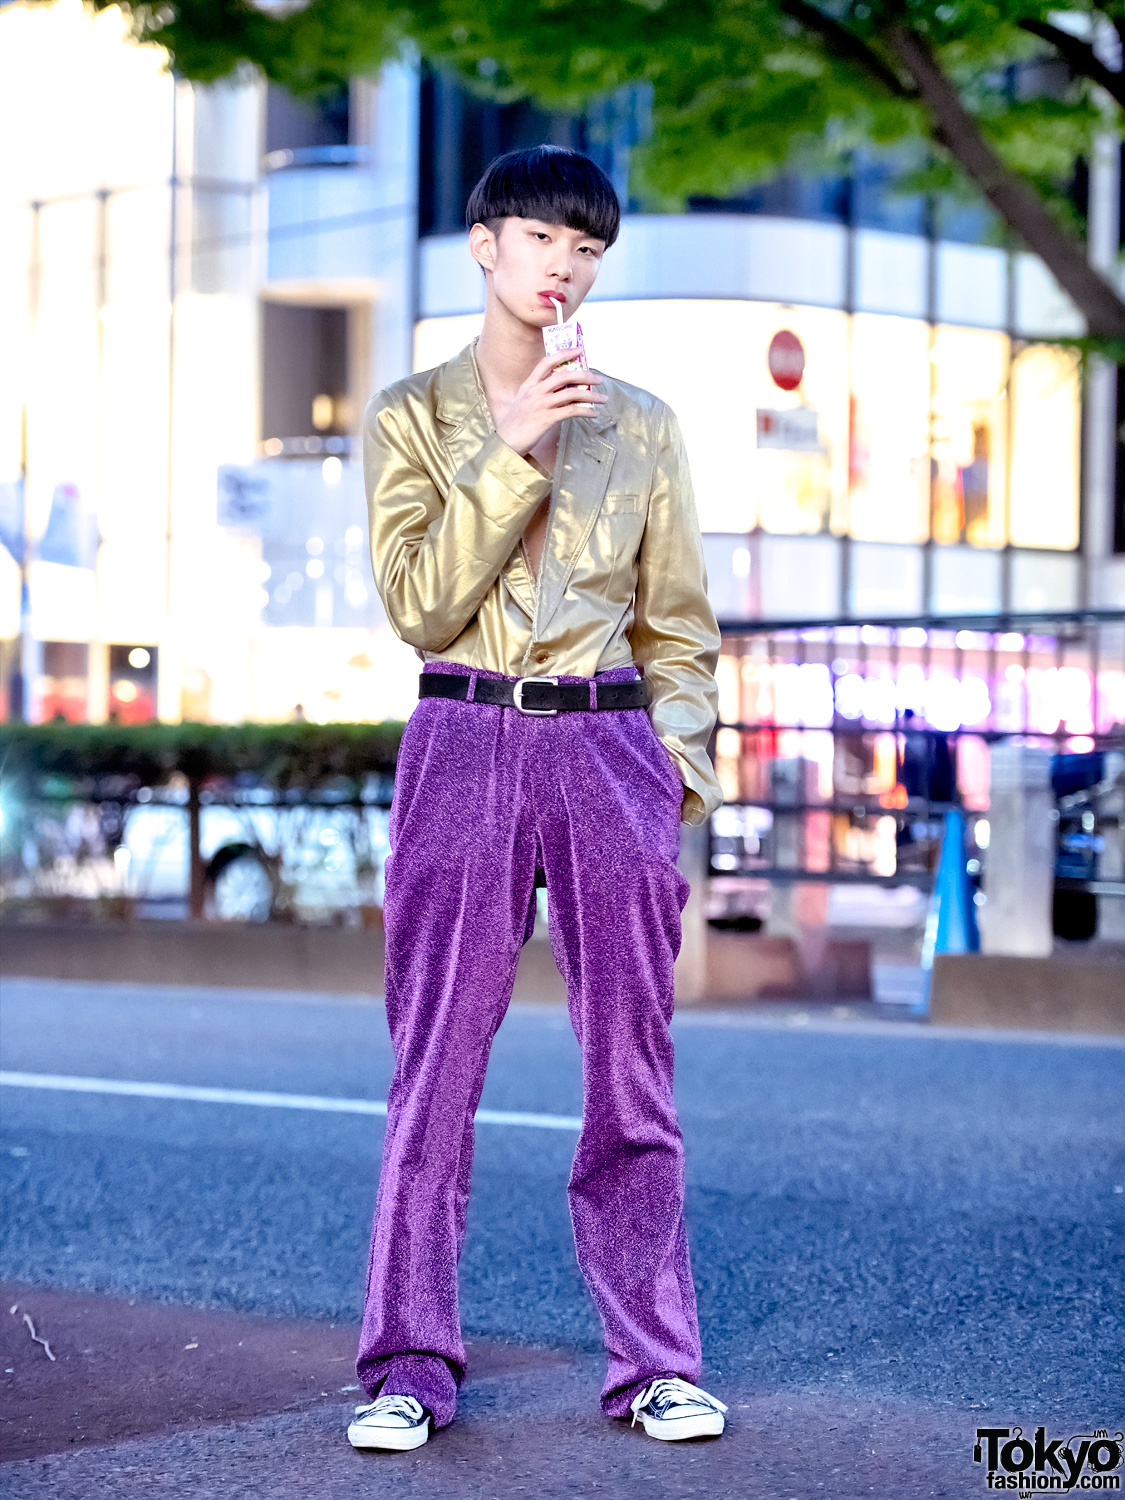 Japanese Streetwear Style w/ Gold Comme Des Garcons Jacket, Sequin Pants & Converse Sneakers